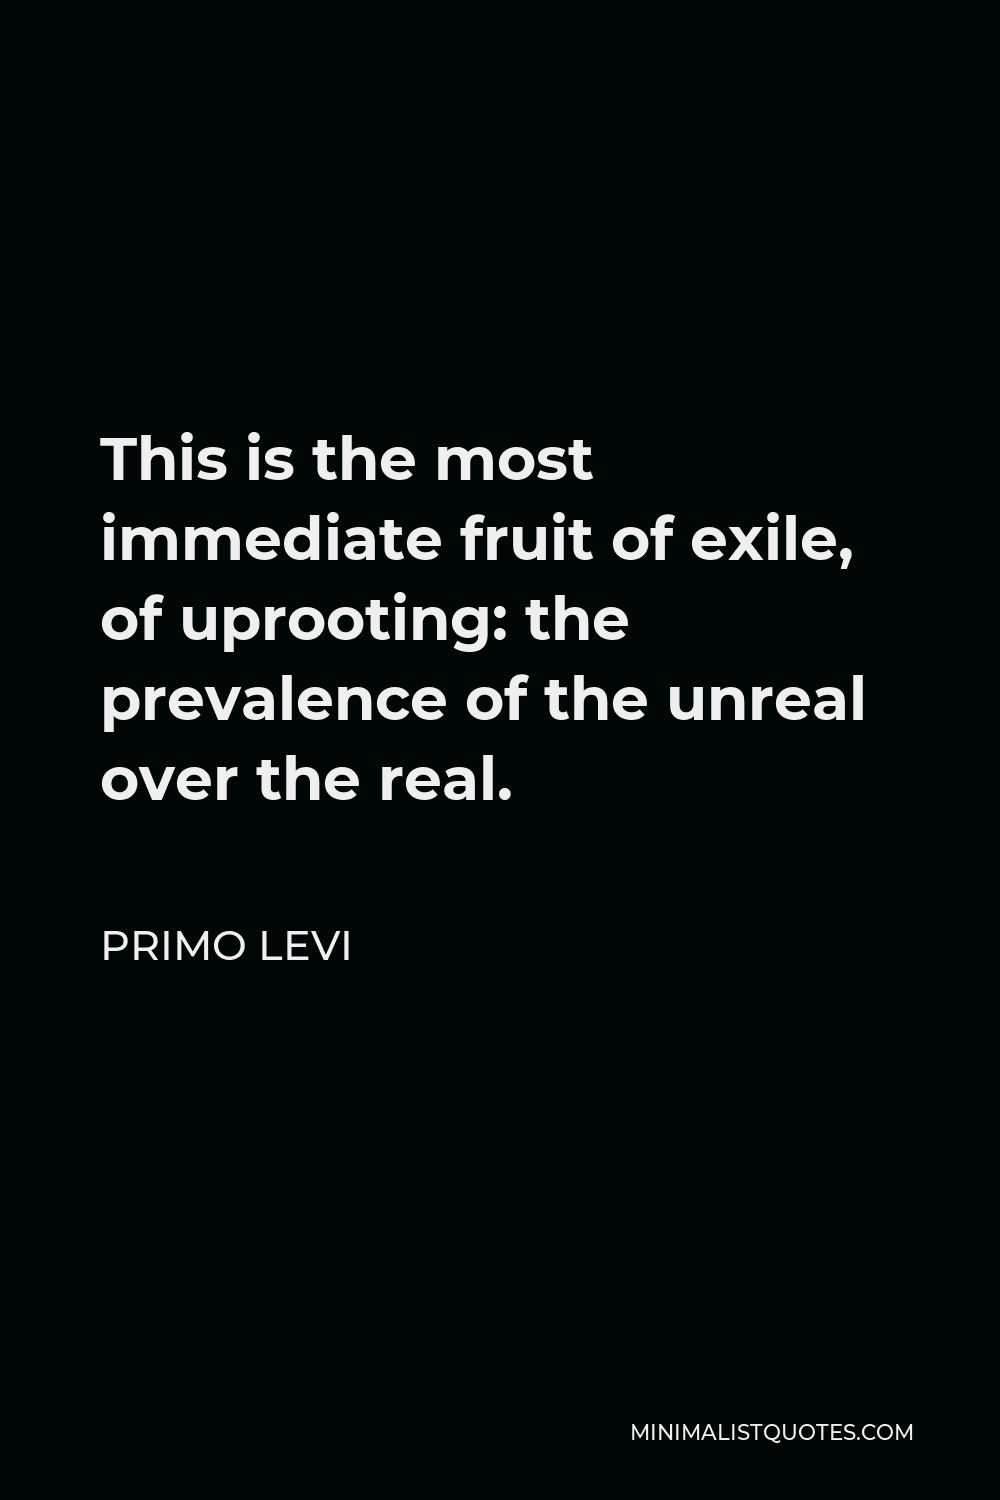 Primo Levi Quote - This is the most immediate fruit of exile, of uprooting: the prevalence of the unreal over the real.